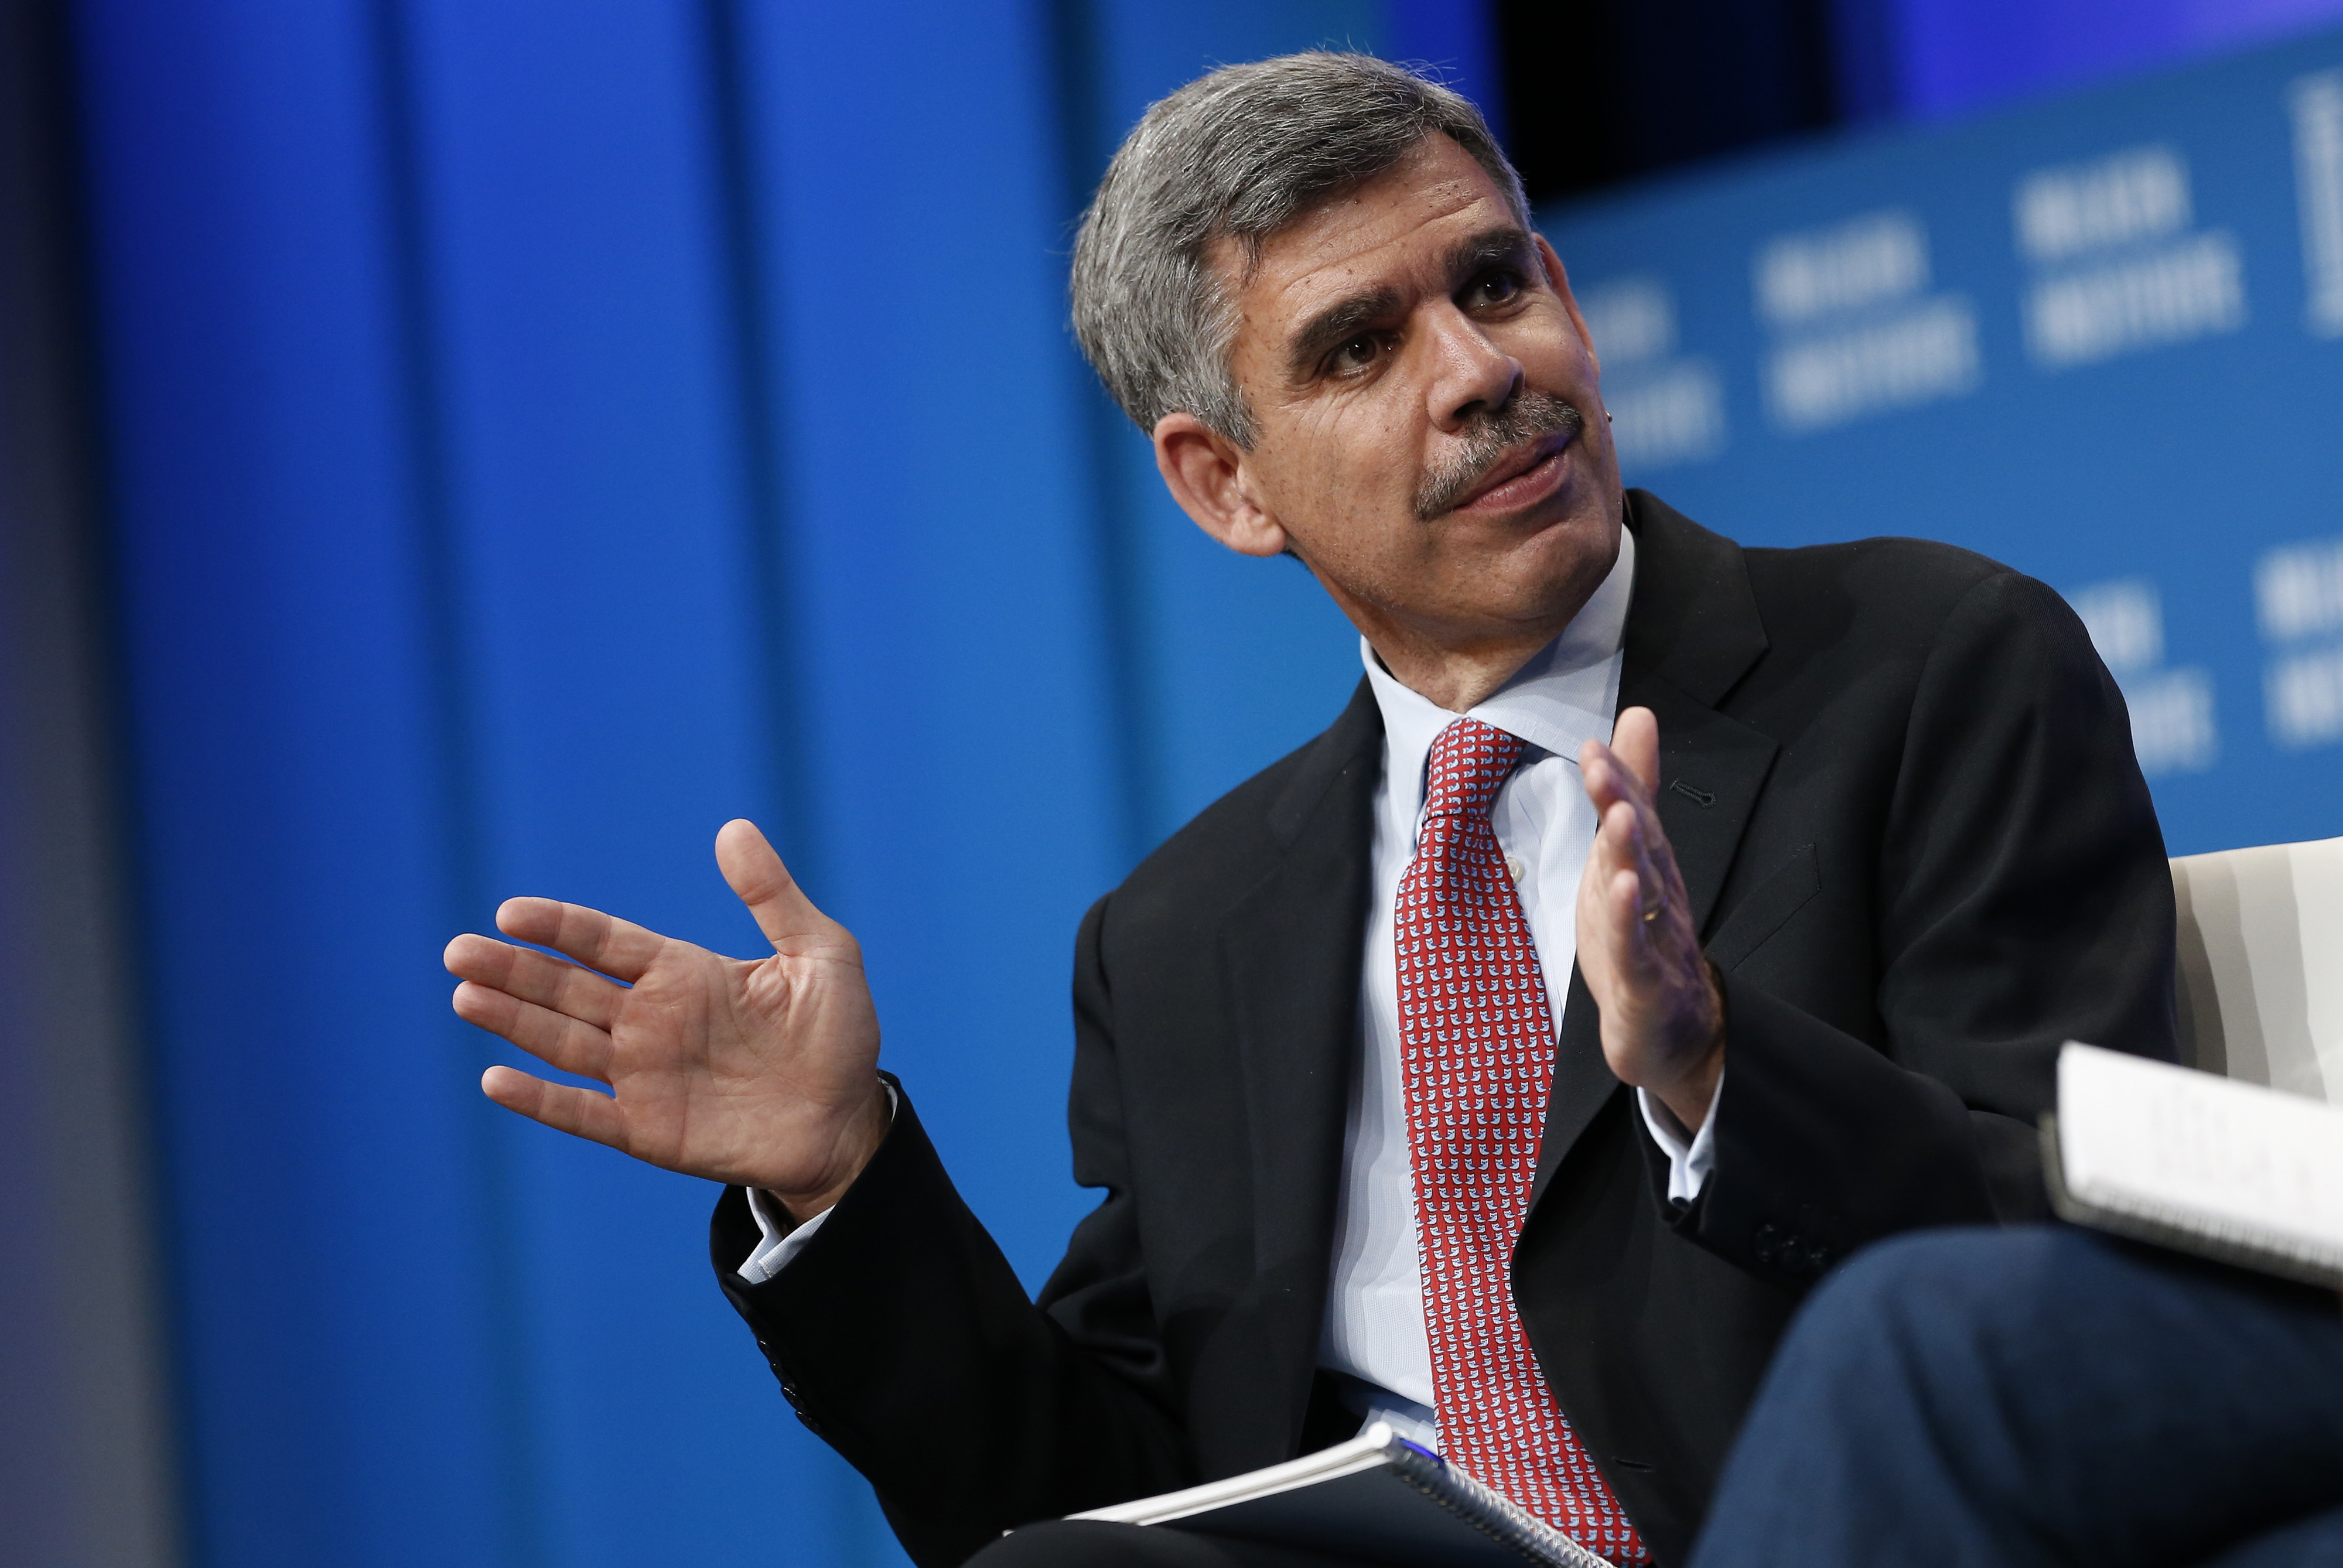 Mohamed El-Erian, chief economic advisor at Allianz SE, speaks during the annual Milken Institute Global Conference in Beverly Hills, California, U.S., on Monday, April 27, 2015. (Bloomberg&mdash;Bloomberg via Getty Images)